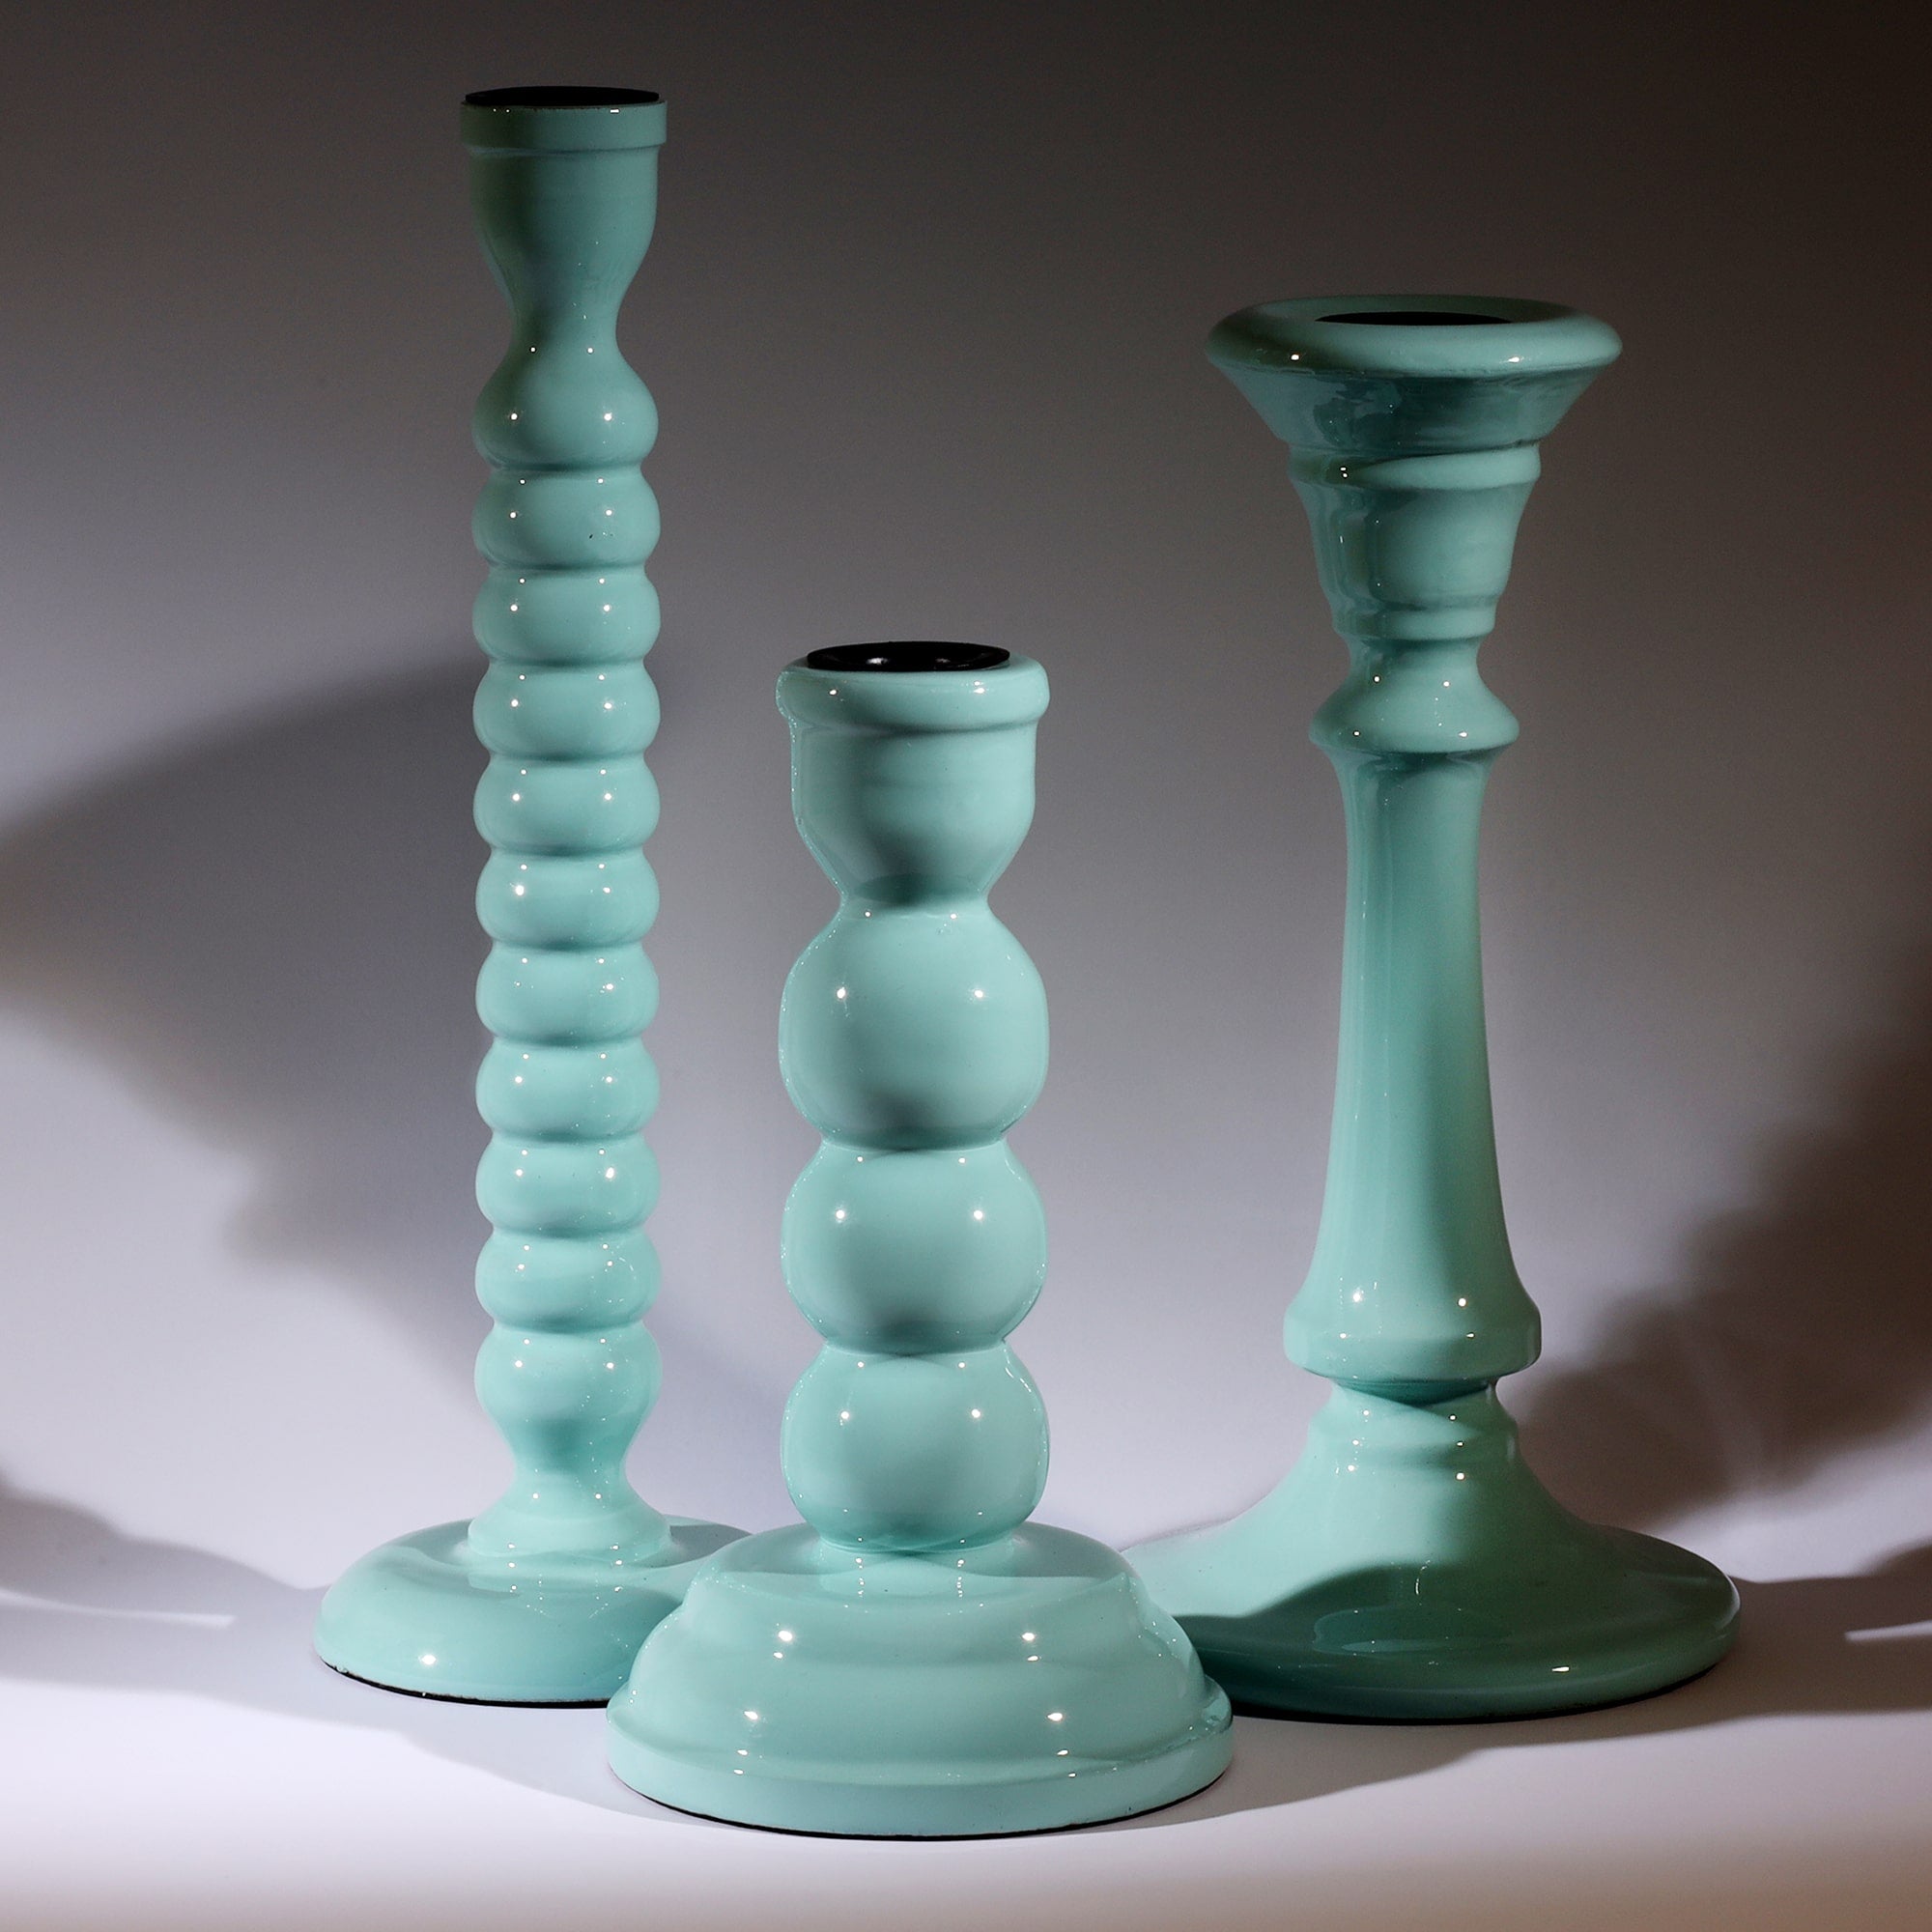 Seashell Blue Candle holder collection in Breeze,Tidal and Drift.